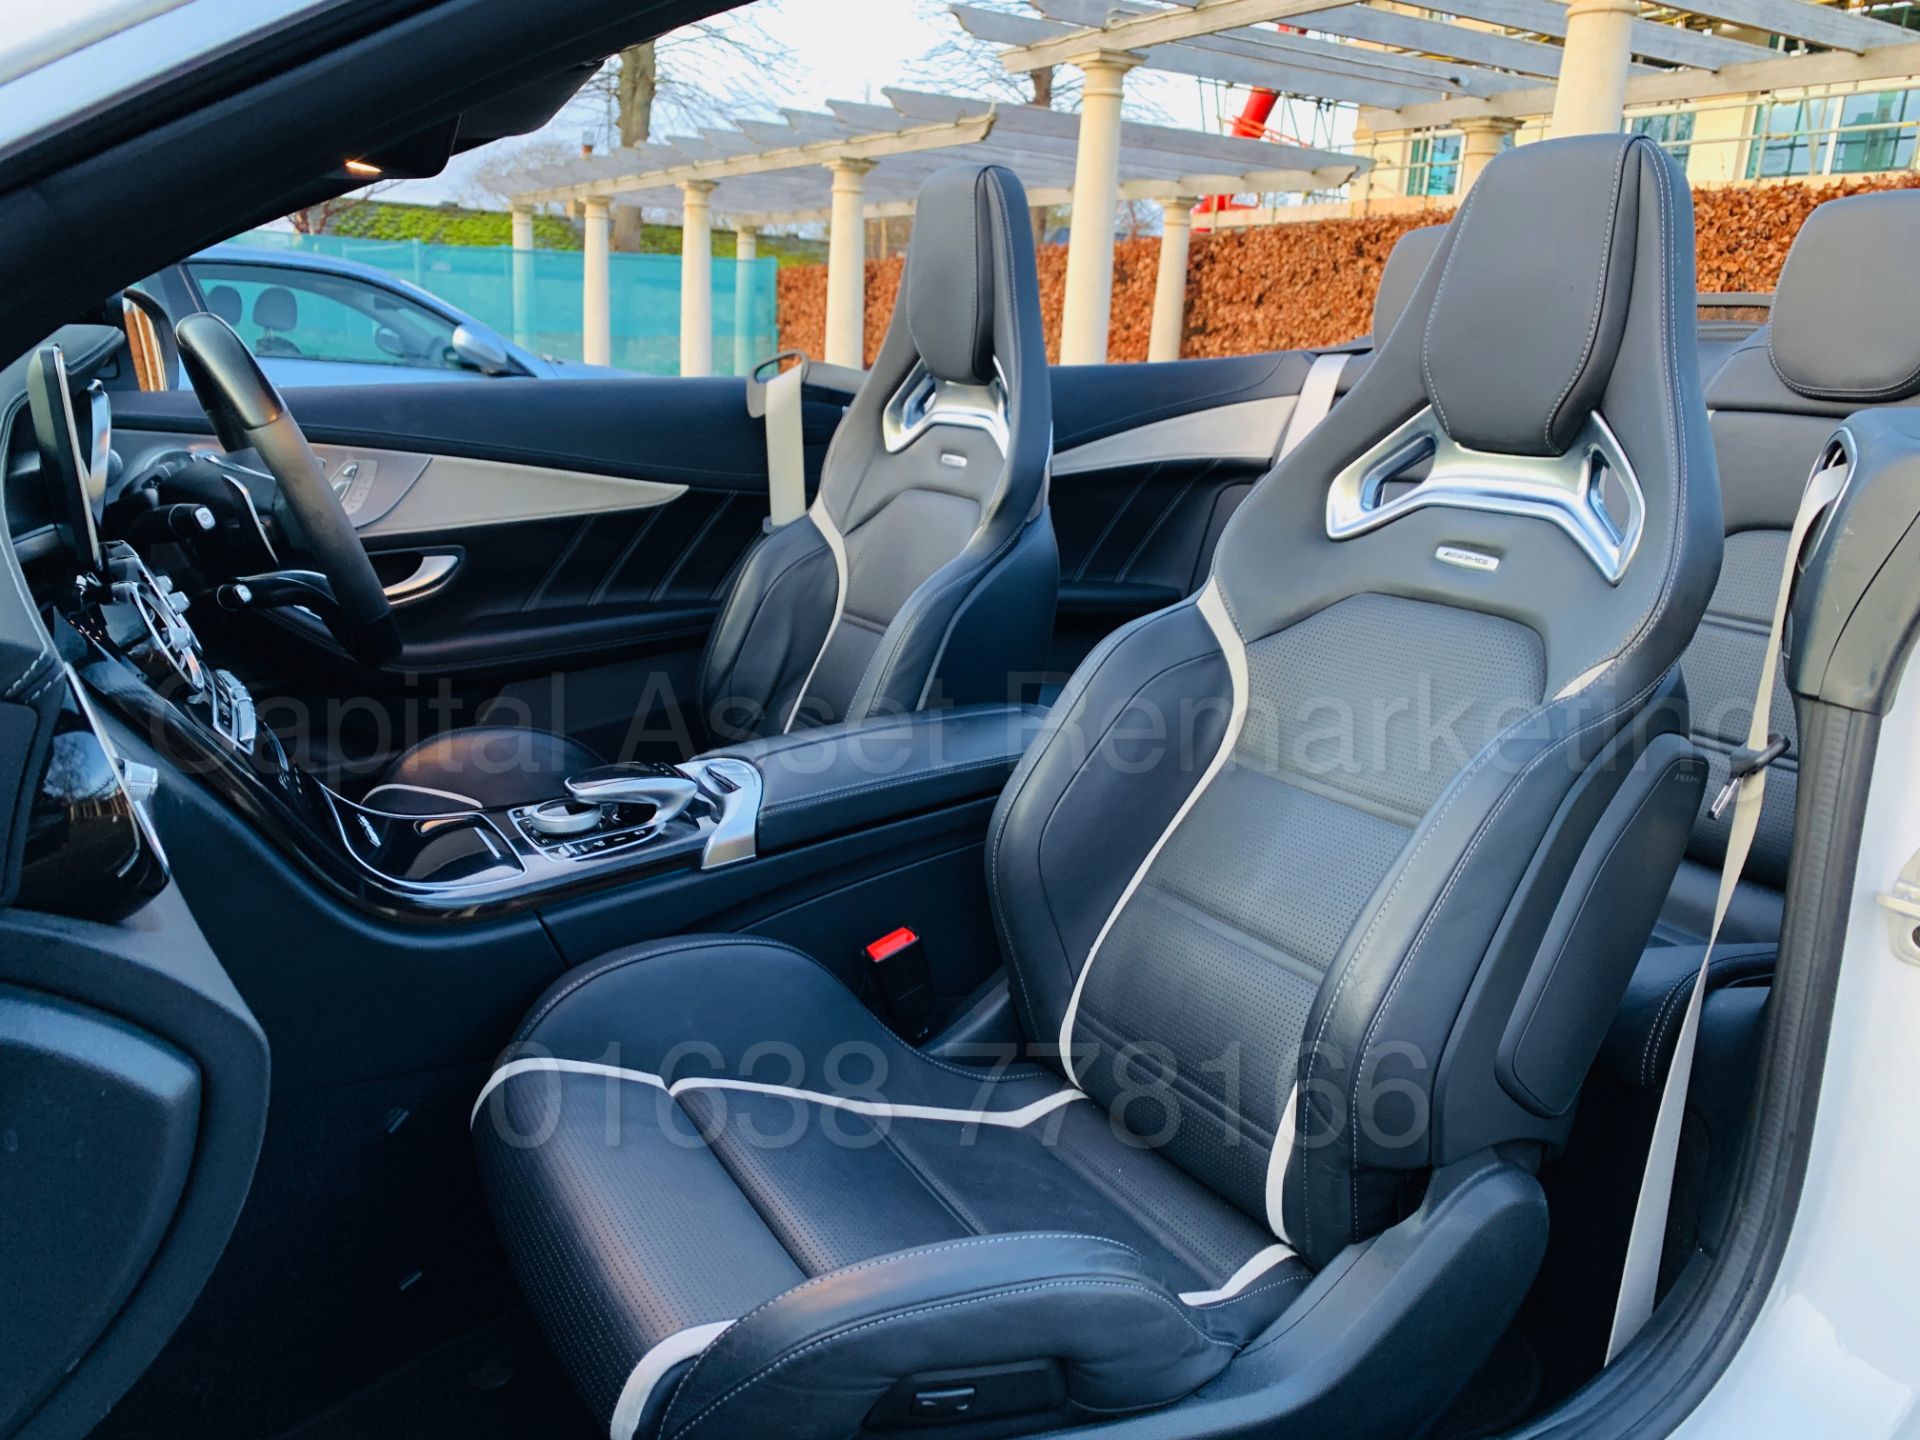 (On Sale) MERCEDES-BENZ AMG C63-S *CABRIOLET* (67 REG) '4.0 BI-TURBO -510 BHP - AUTO' *FULLY LOADED* - Image 47 of 79